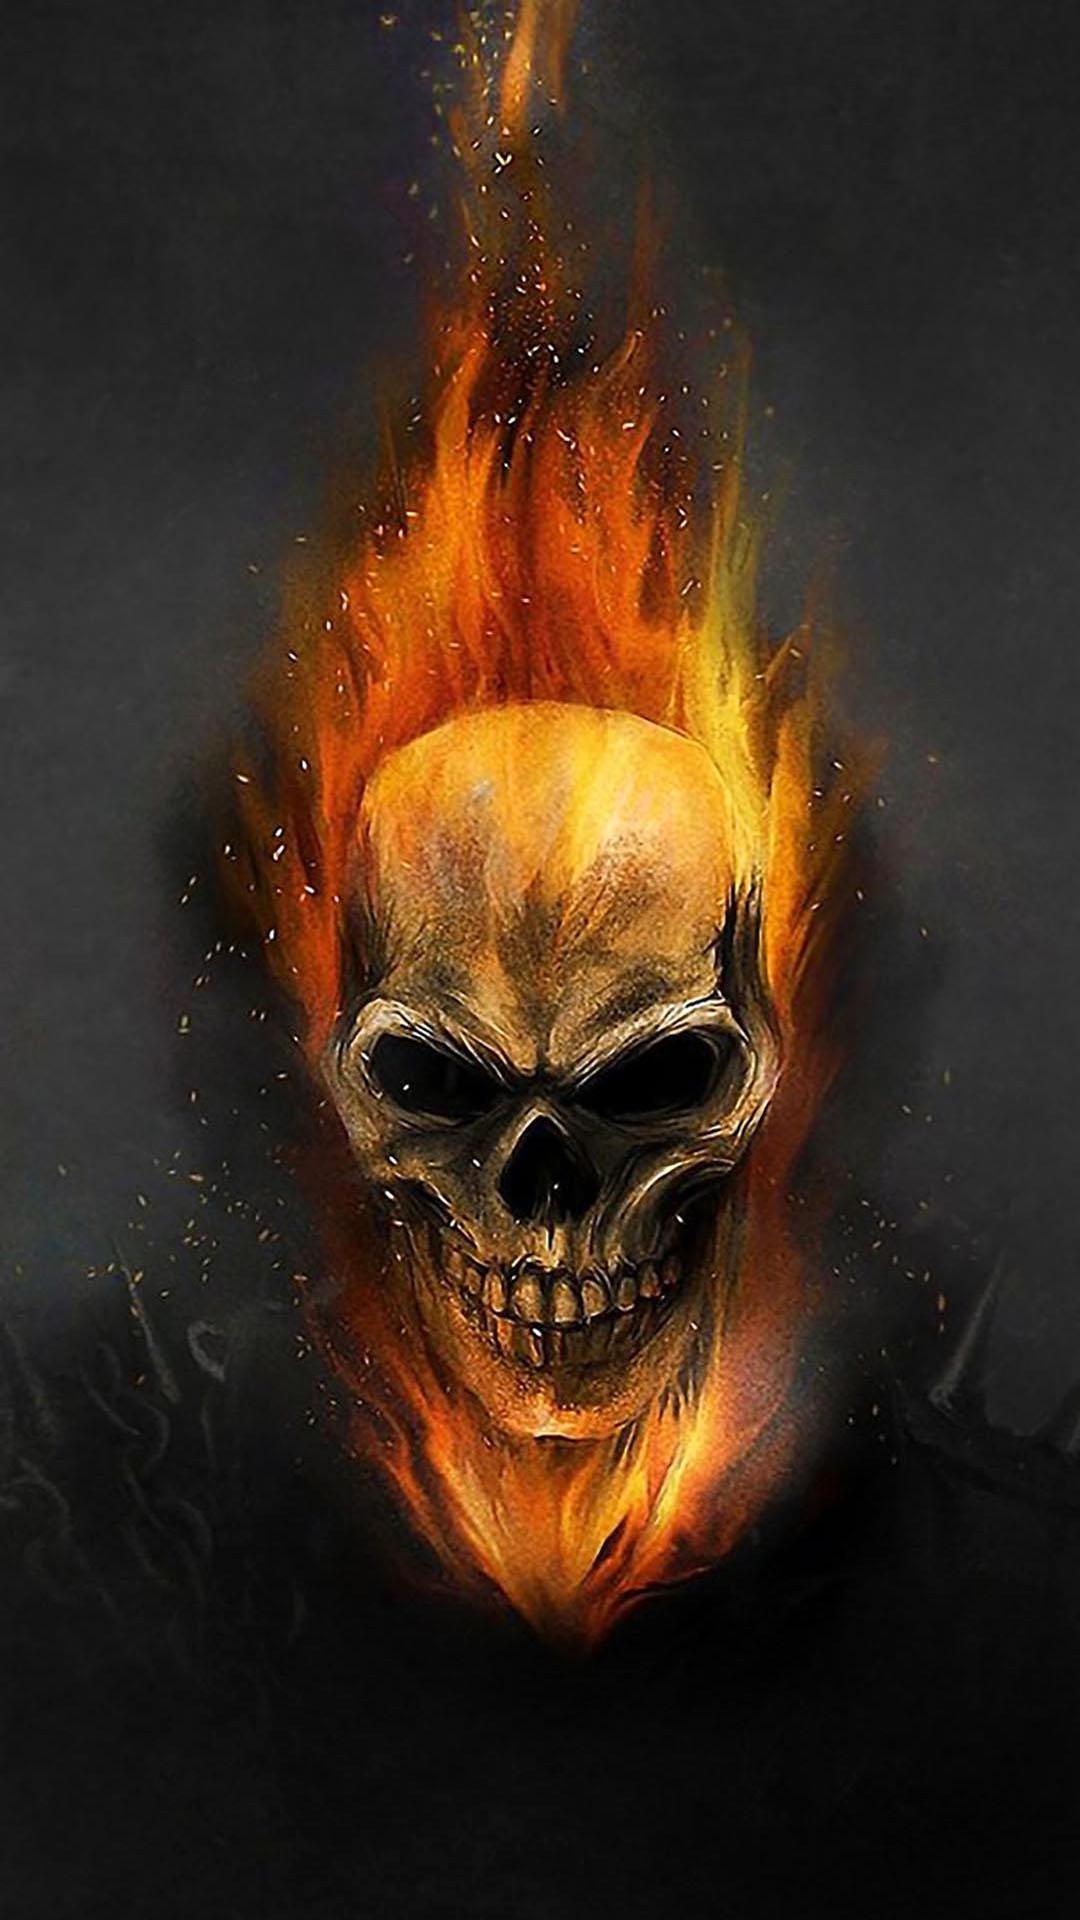 Scary Wallpaper (4K Ultra HD) for Android - APK Download